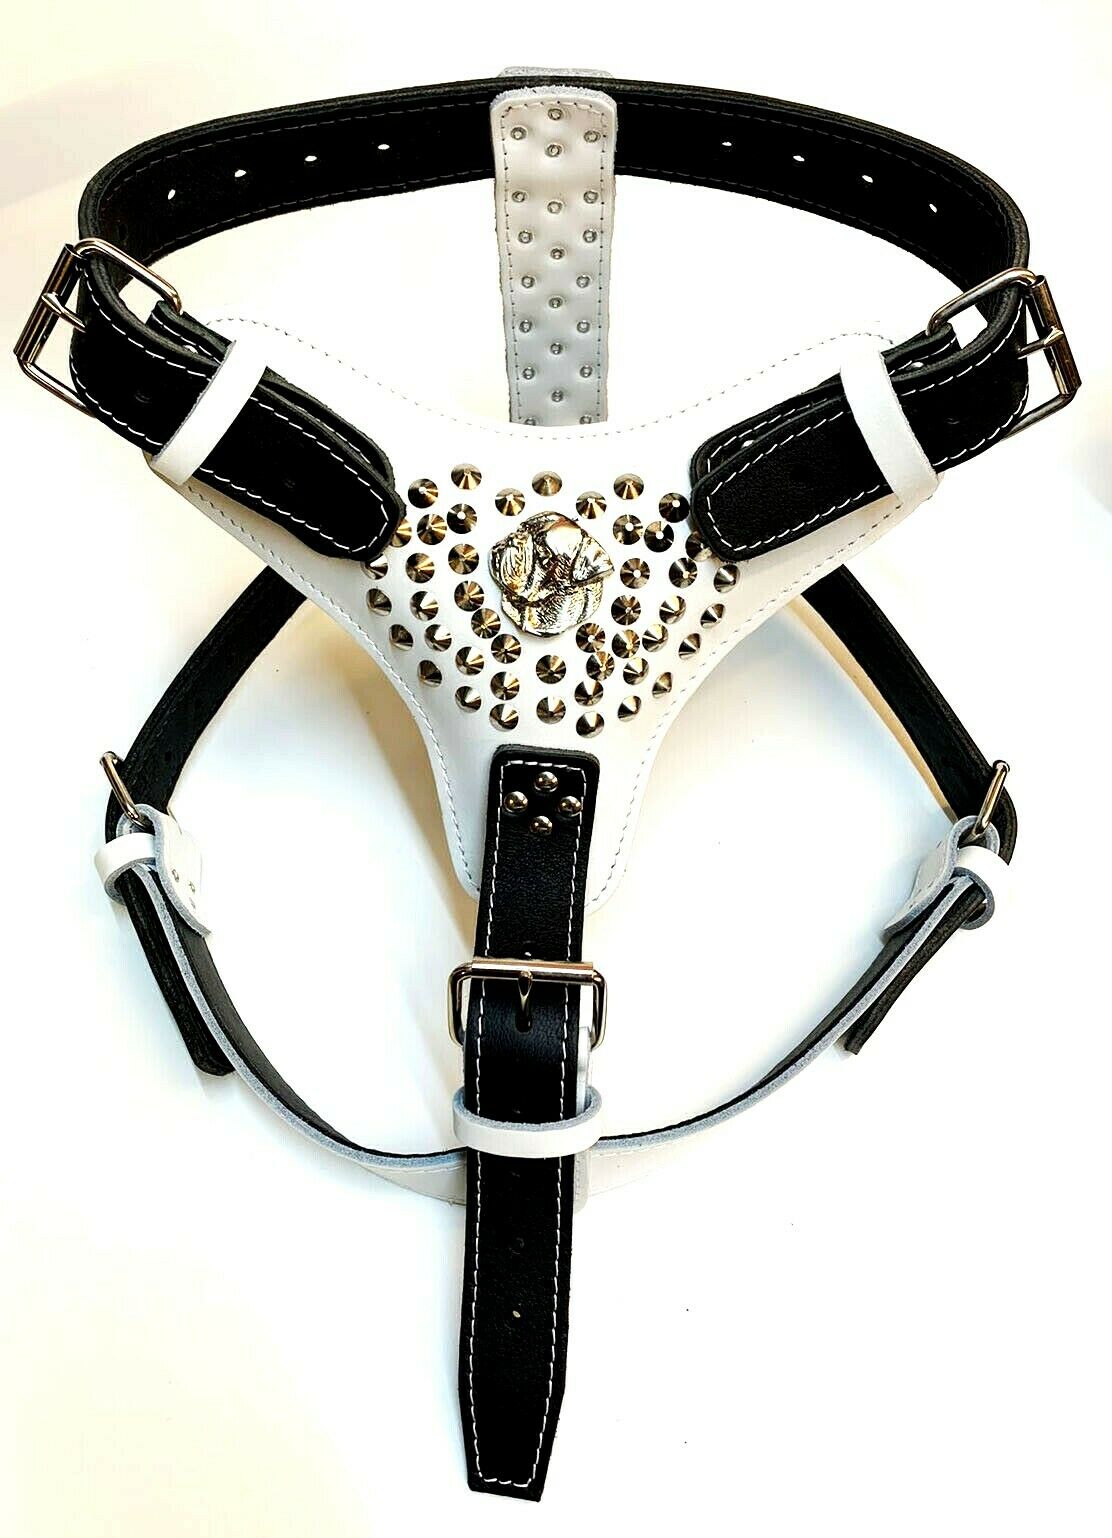 Two Tone Extra Large Heavy Duty White/Black Leather Dog Harness with American Bulldog Head